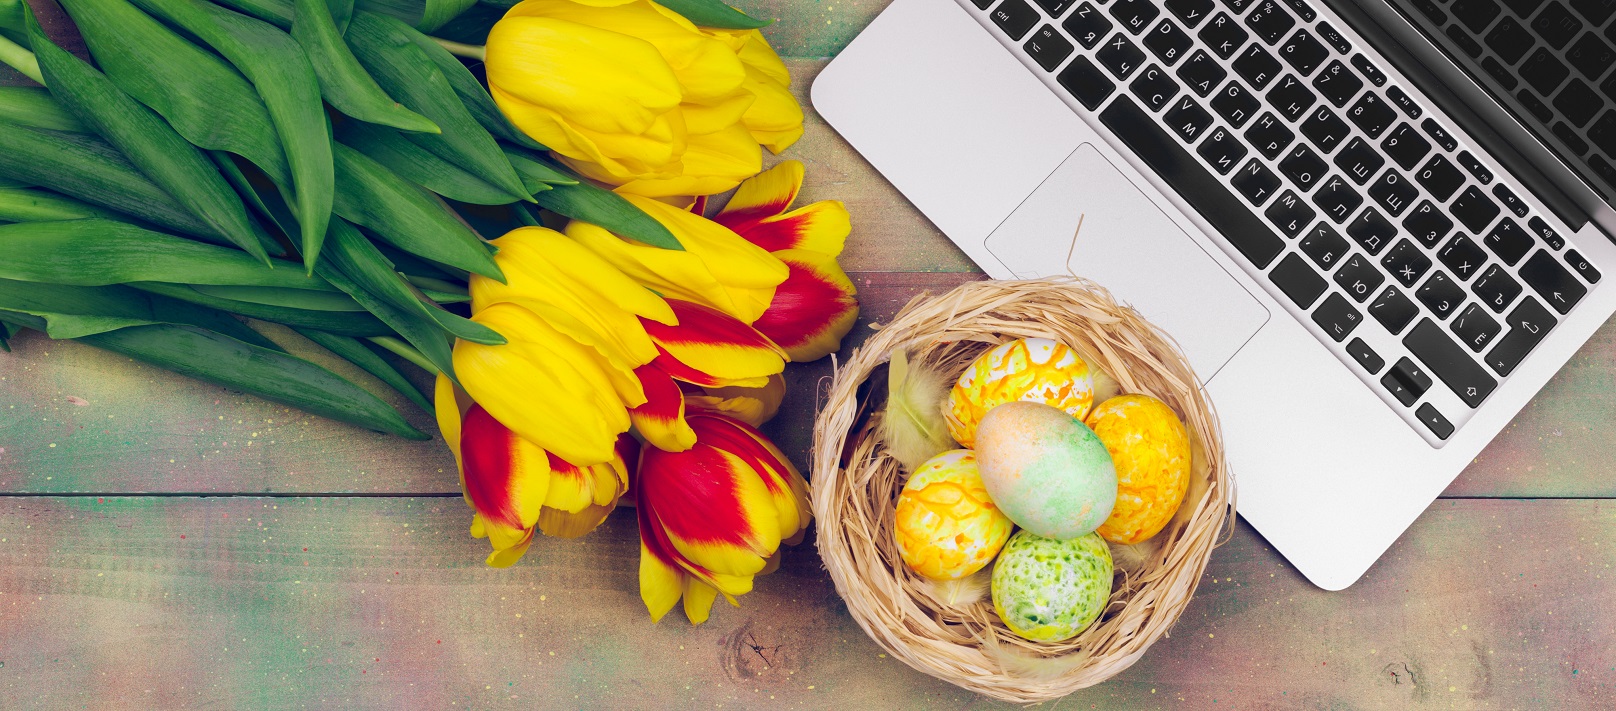 Easter eggs, mockup laptop and bouquet of tulips.